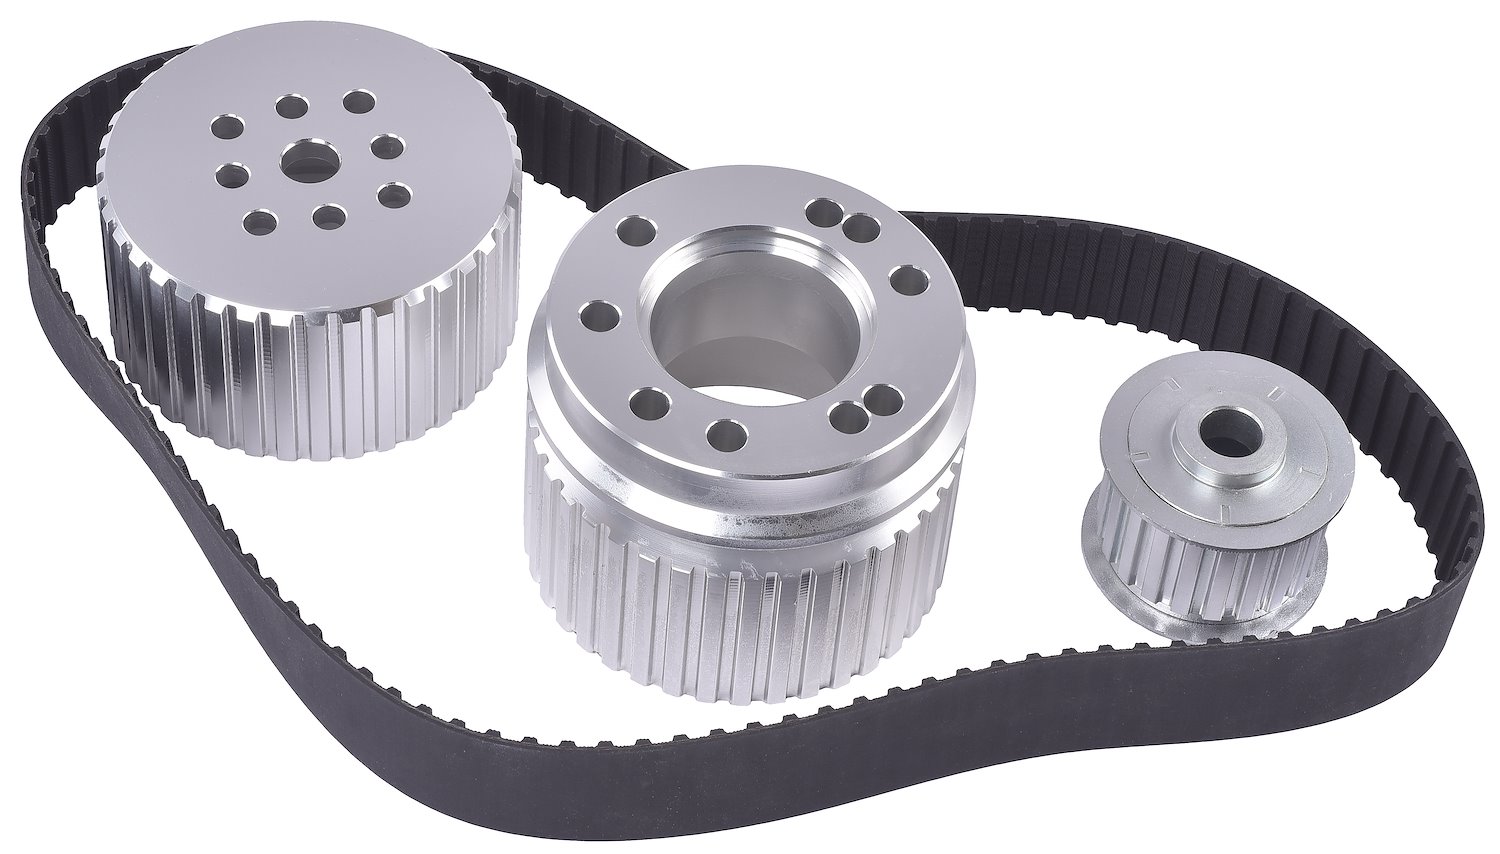 Gilmer Drive Pulley Kit for Big Block Chevy